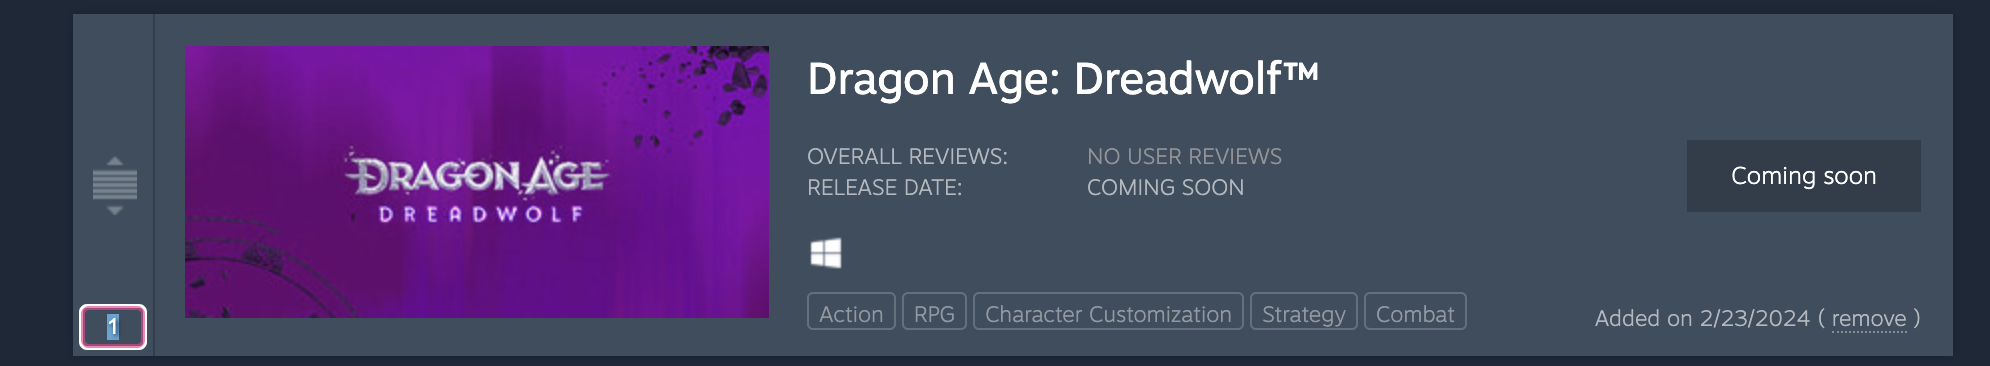 A screengrab of the wishlist page on the Steam website, showing a single item: Dragon Age: Dreadwolf. The item has a highlighted rank order text box, which shows a user is typing into it the number 1.